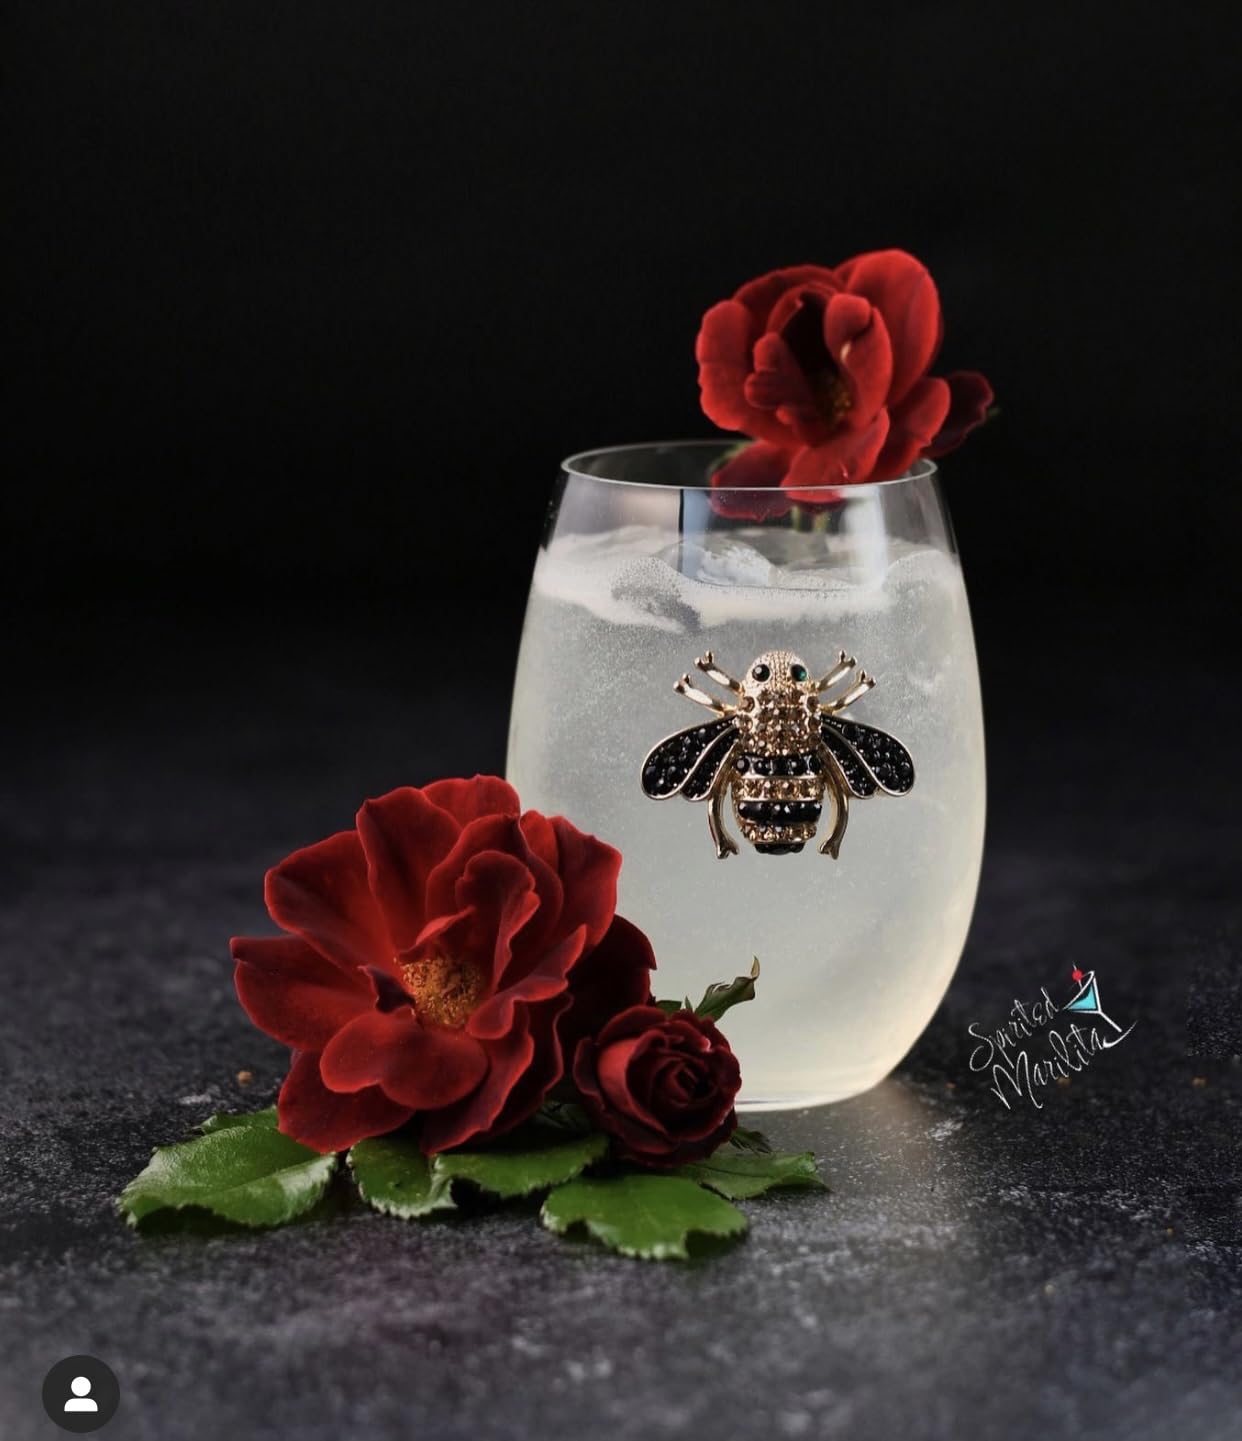 THE QUEENS' JEWELS - Bee Stemless Wine Glass, 21 oz. – Jeweled Eye-Catching Bumble Bee - Hand-Decorated Glassware – Not Painted – Dazzling and Unique